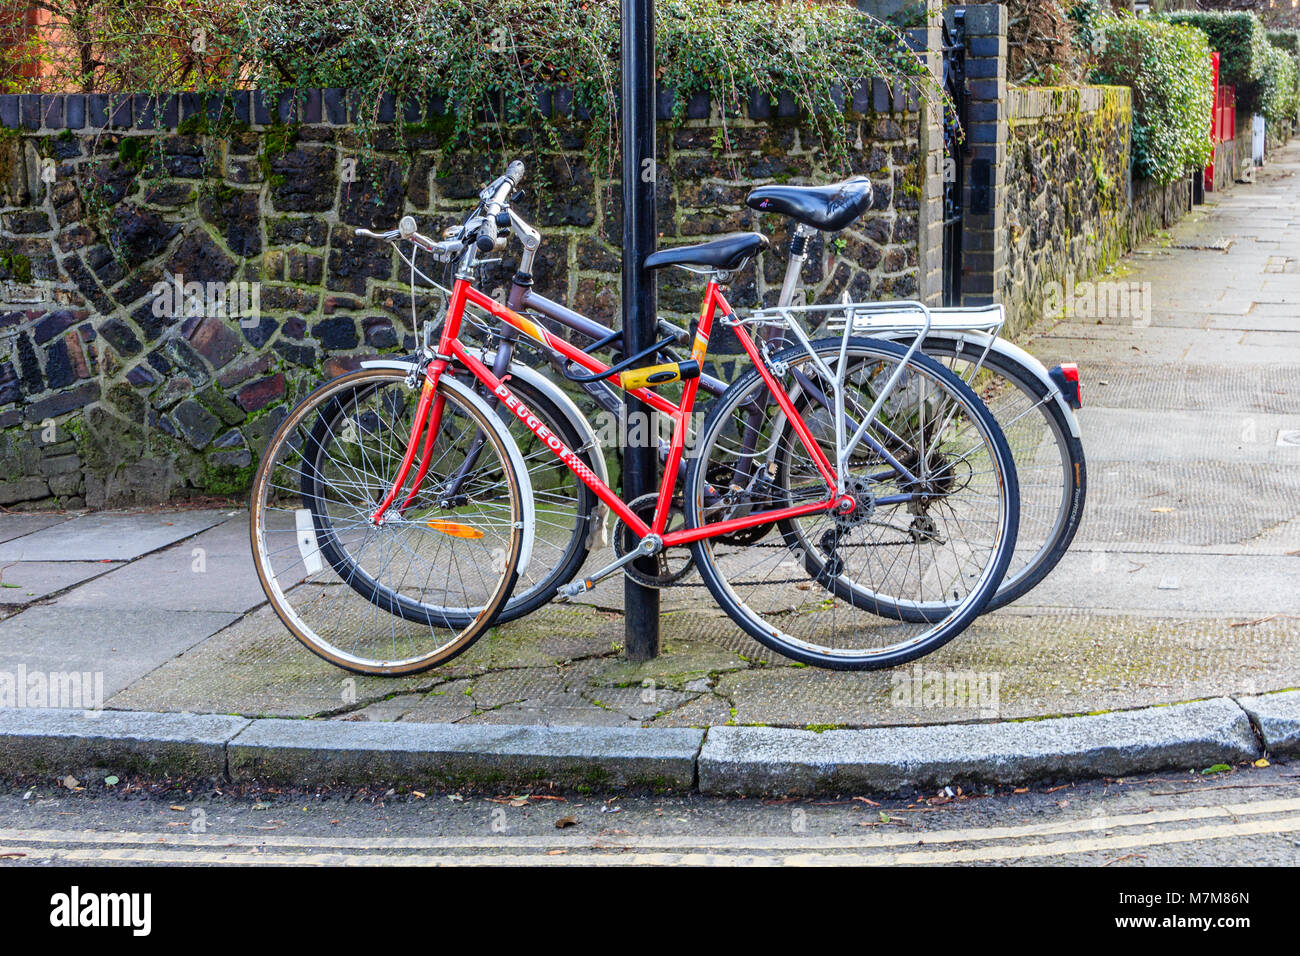 Two abandoned bicycles chained to a street sign in a residential street in North London, UK Stock Photo